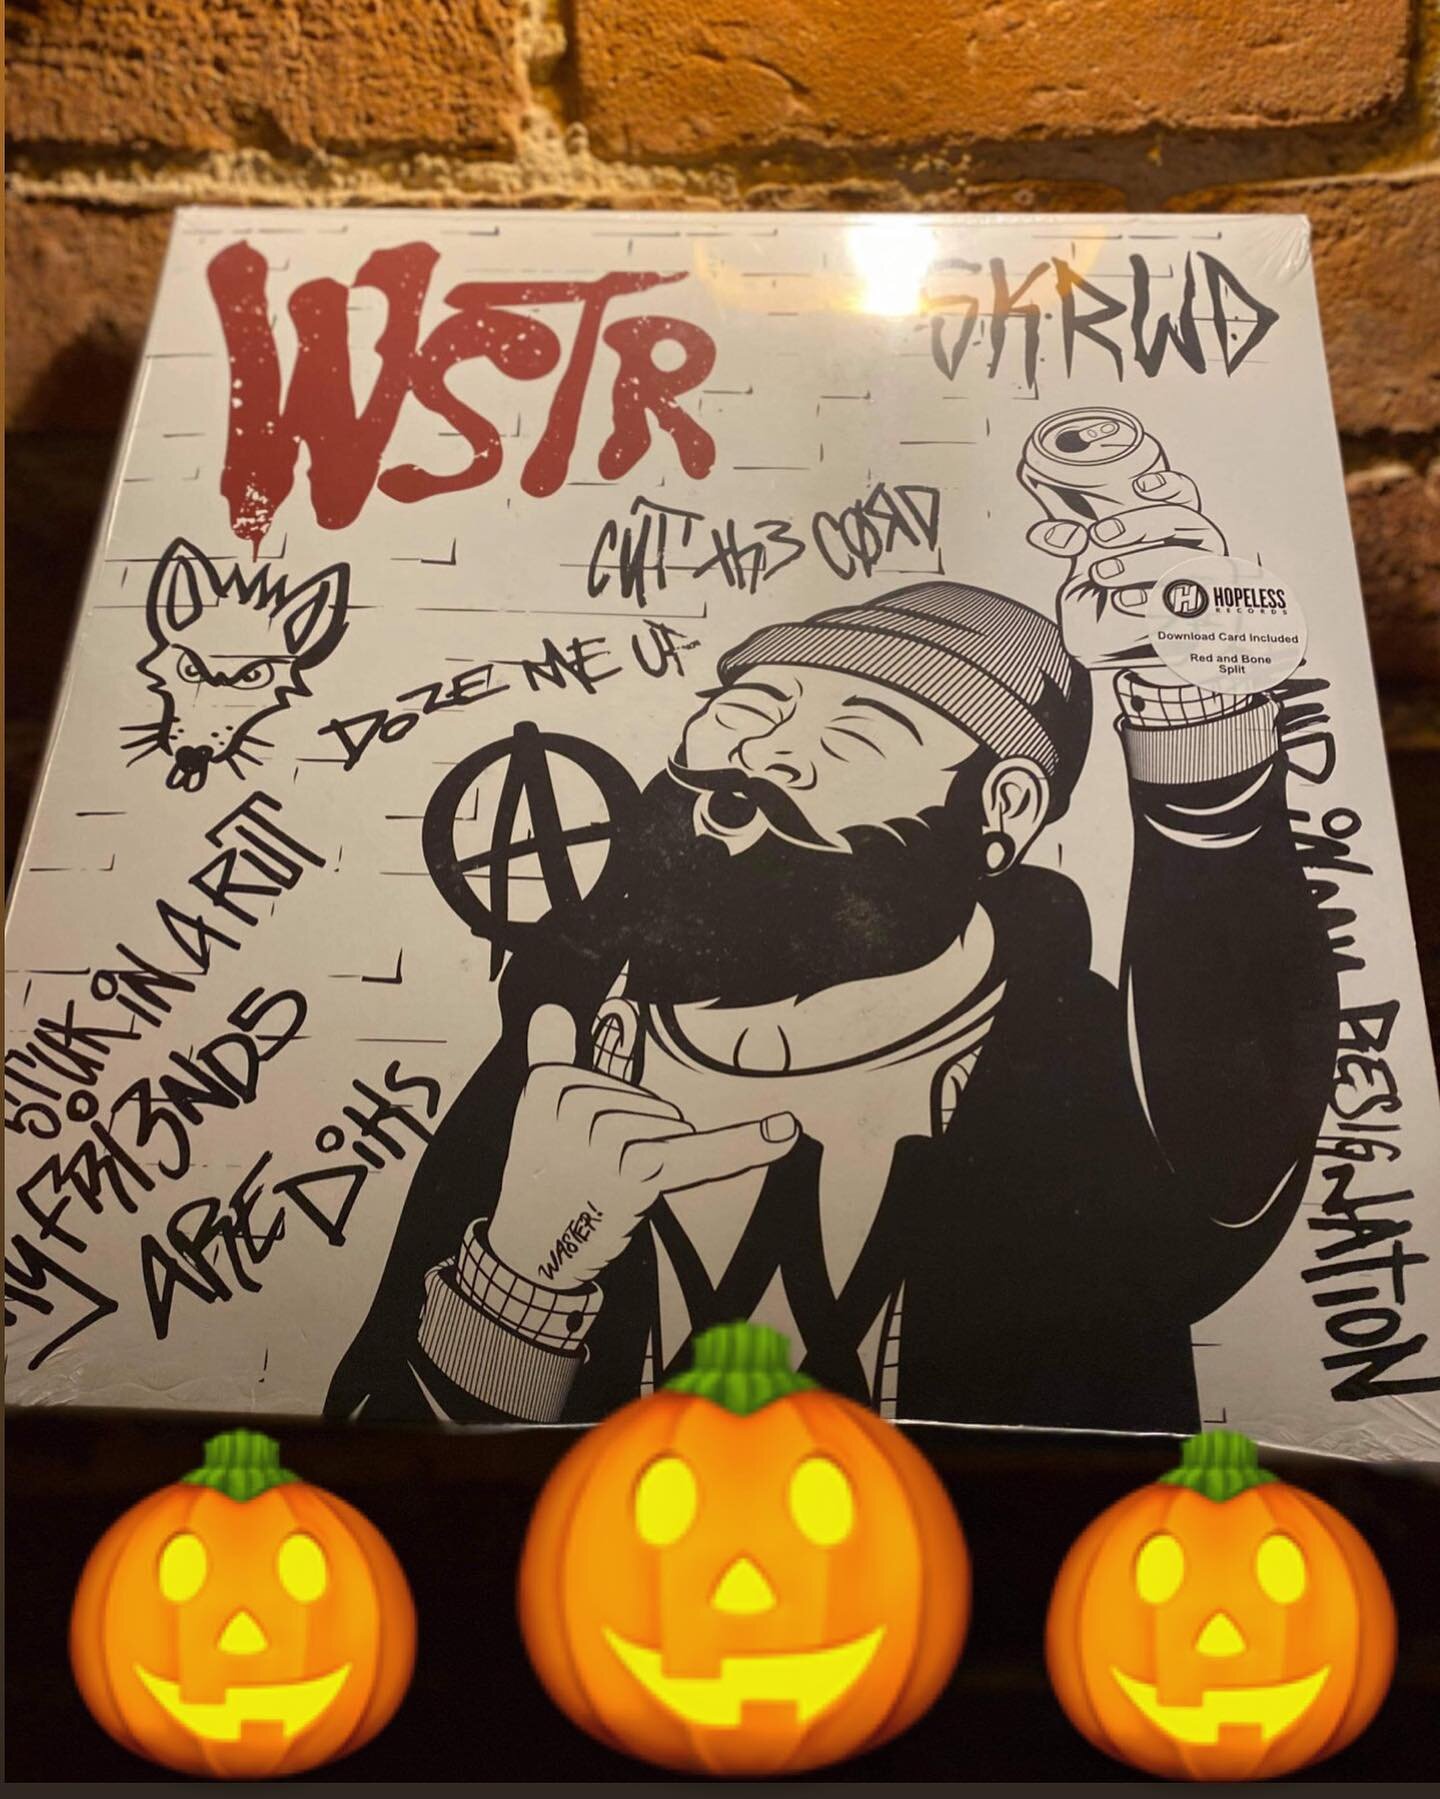 BEST PUMPKIN WINS!!!

Post your WSTR pumpkins and tag us using #wstrween for a chance to win!
The winner gets a copy of our SKRWD vinyl!

It&rsquo;s our favourite time of year and we&rsquo;re going to miss dressing as Scoobie Doo&rsquo;s Mystery Gang